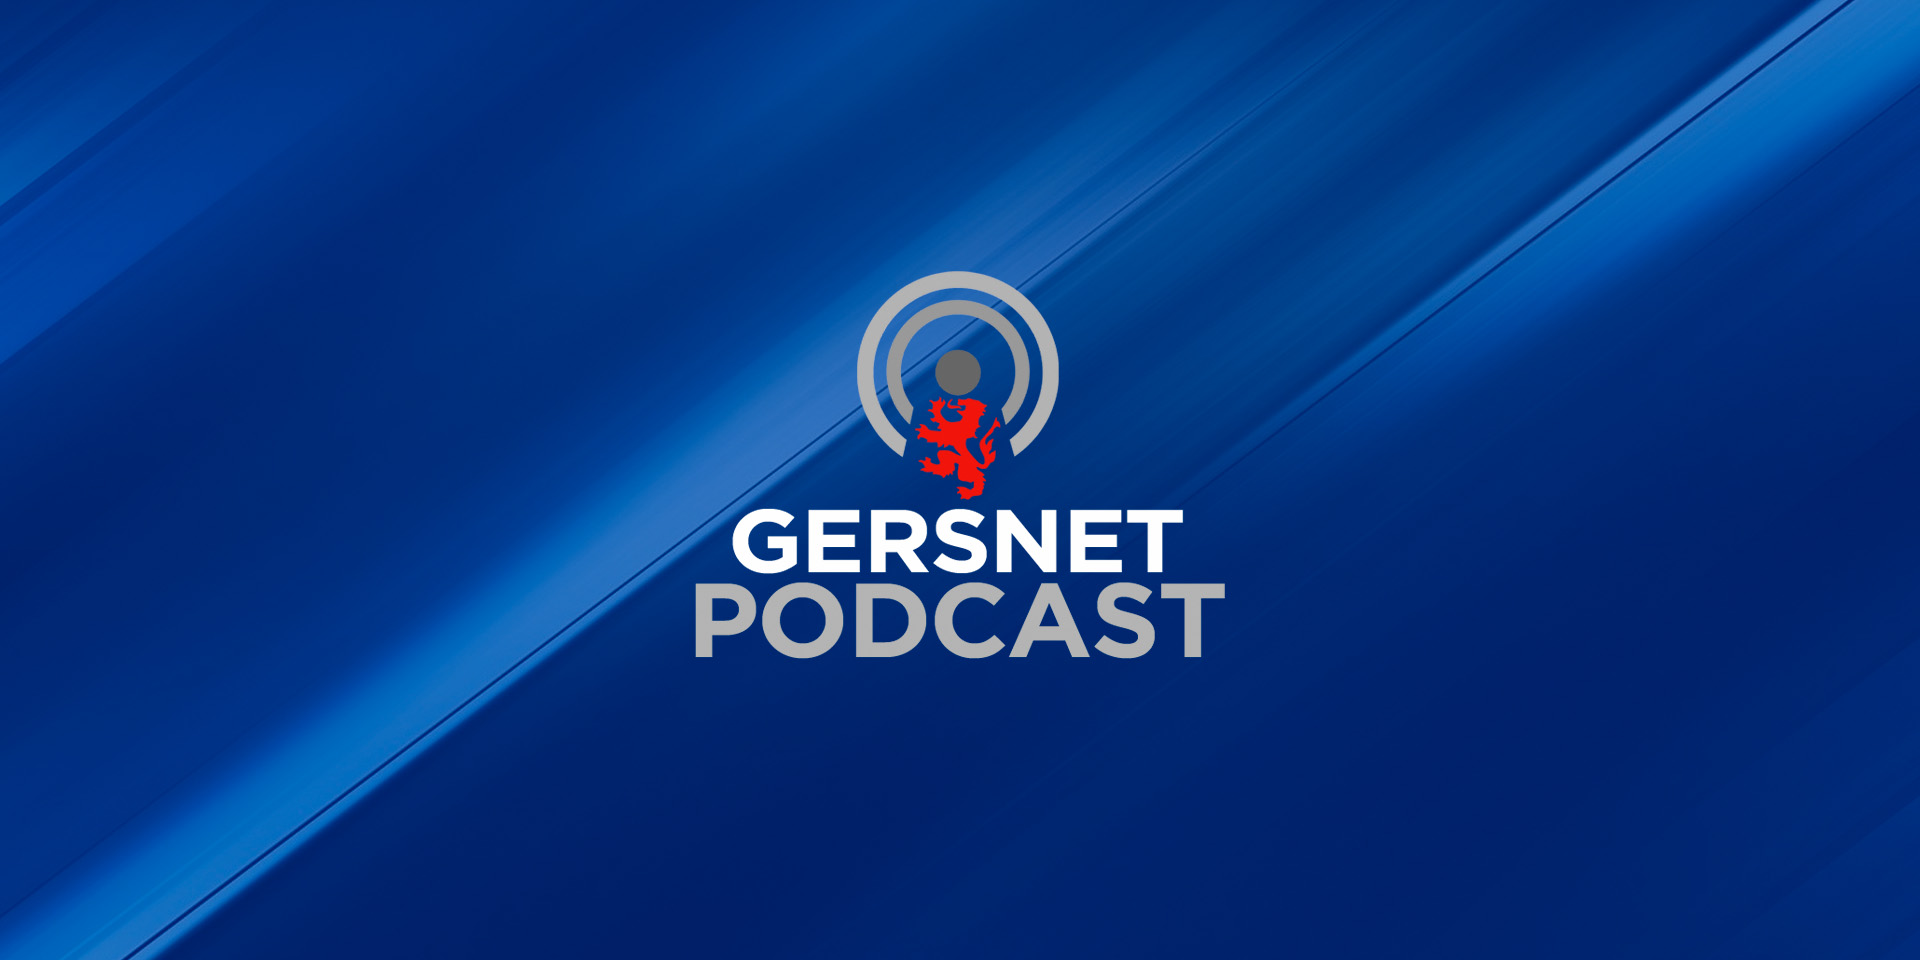 Gersnet Podcast 267 - Important or irrelevant?